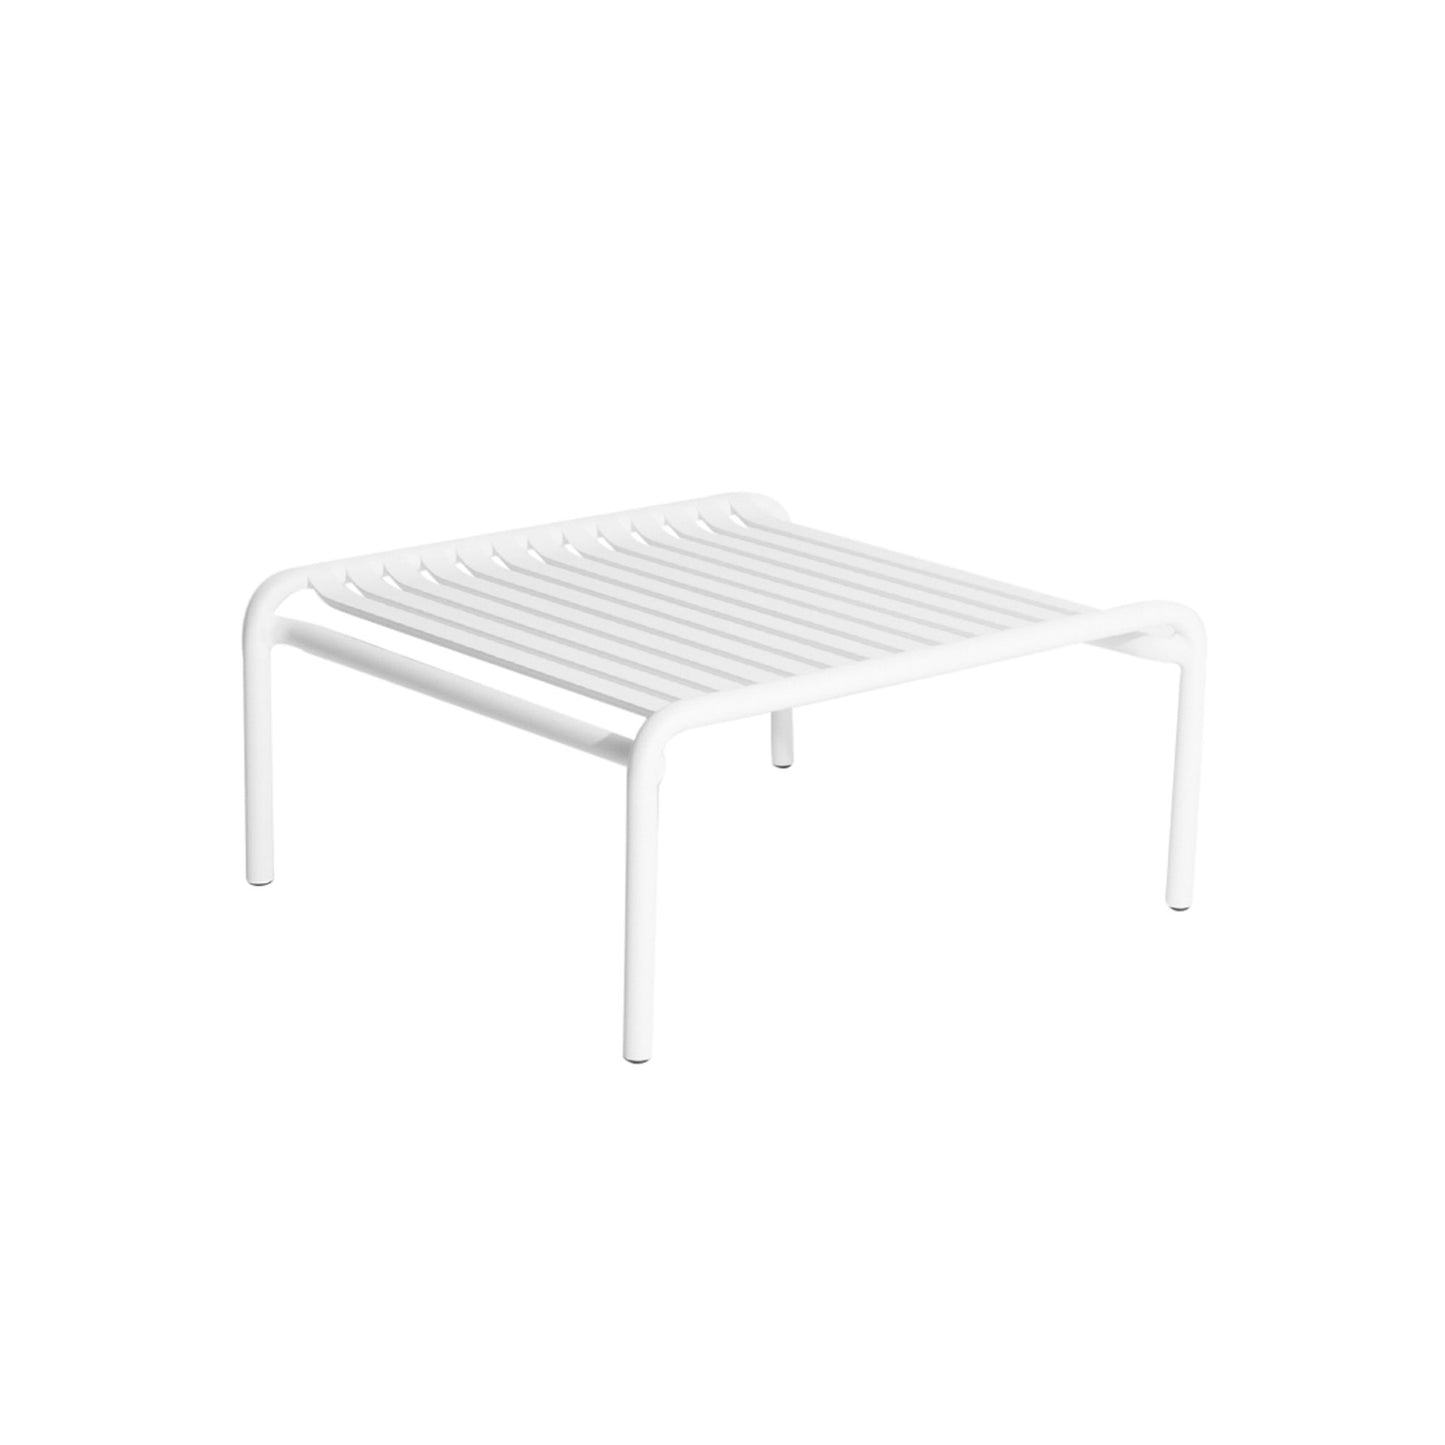 WEEK-END Coffee Table by Petite Friture #White